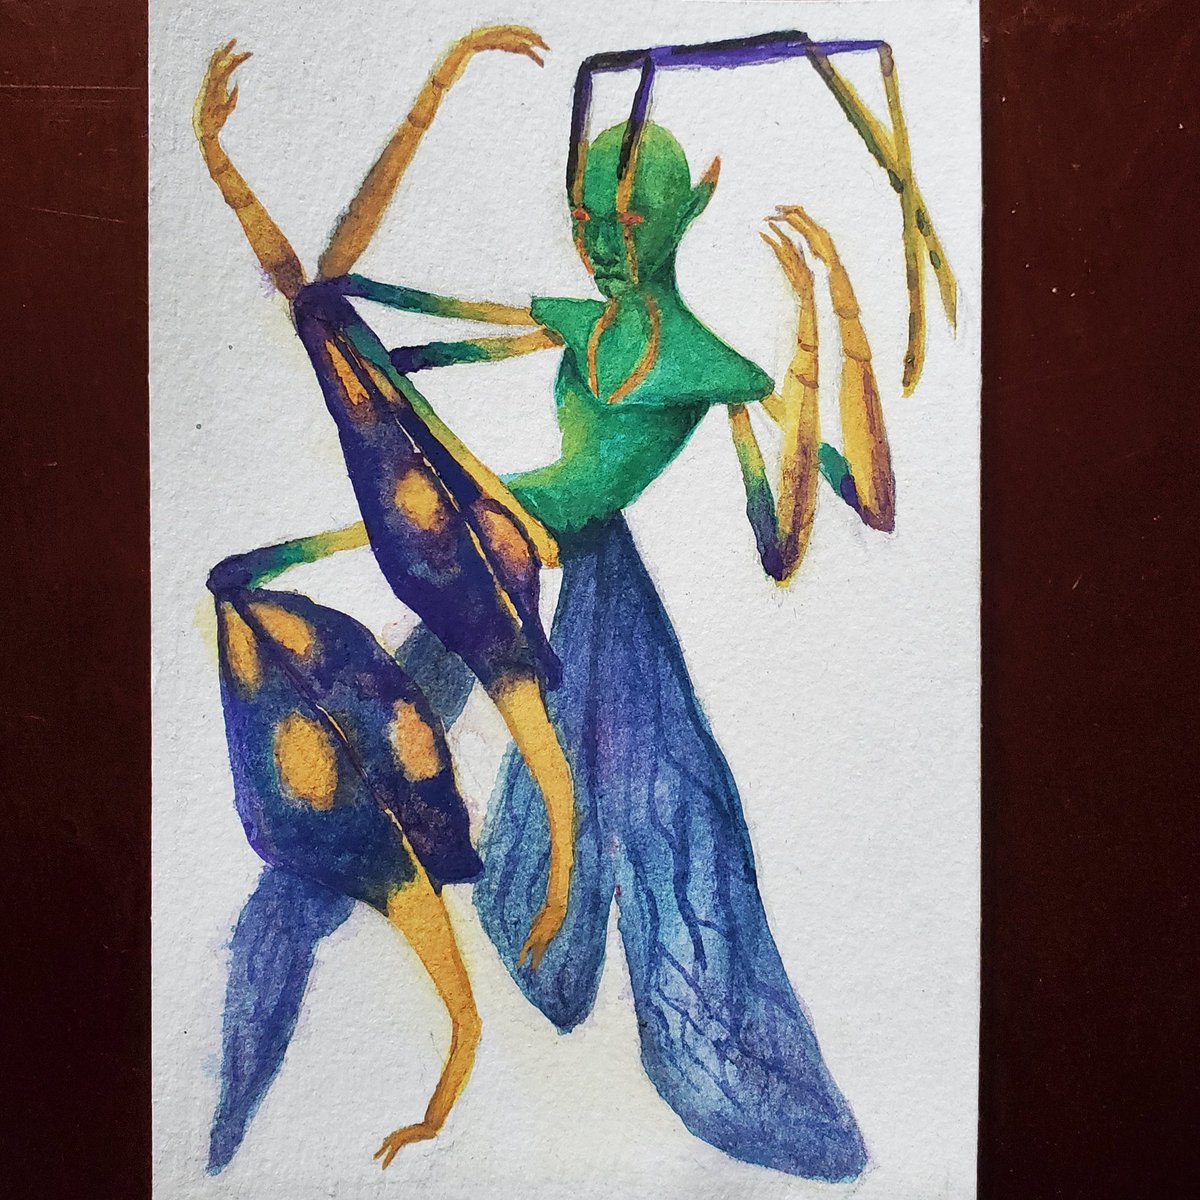 Time to repost this #faebruary piece for @cicada_kid at this stage
⁠
#fairy #insect #antennae #wings #tall #assassinbug #fancypants #characterdesign #fae #faerie #jump⁠
#watercolor #painting #card #gift #green #yellow #purple